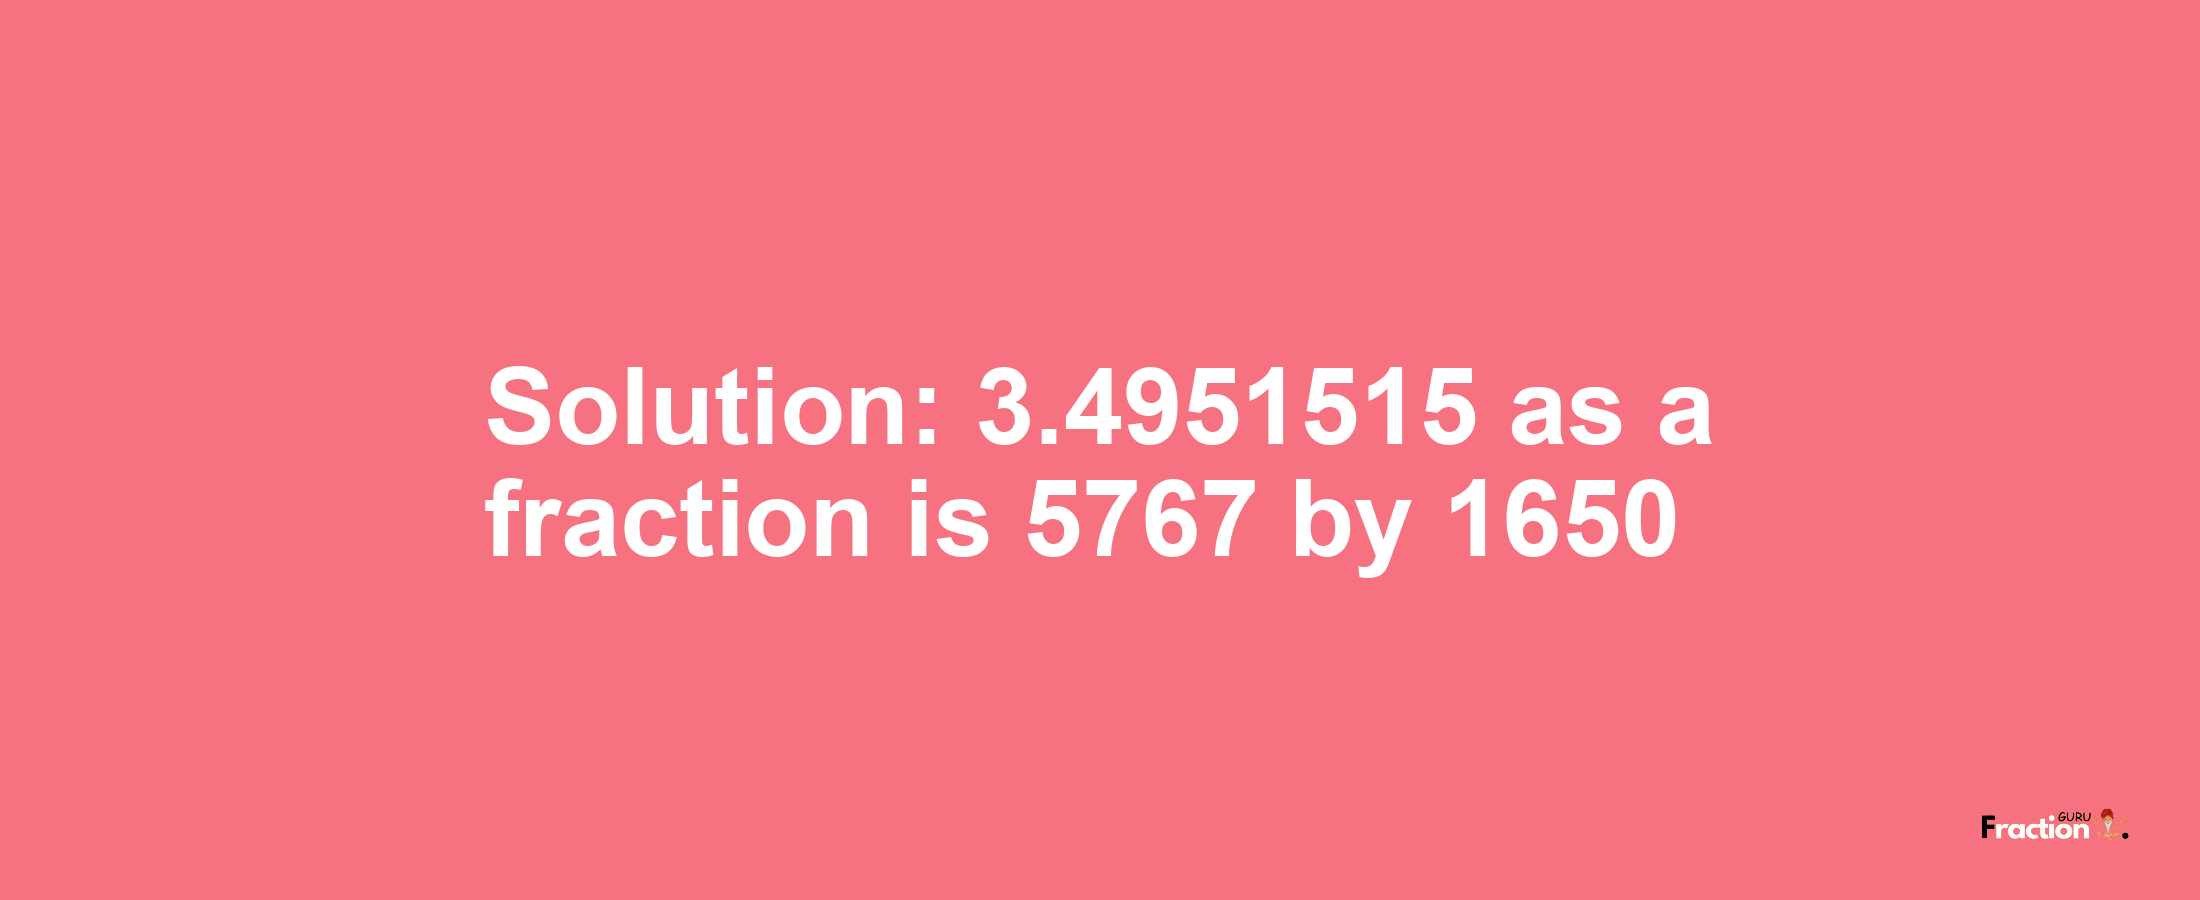 Solution:3.4951515 as a fraction is 5767/1650